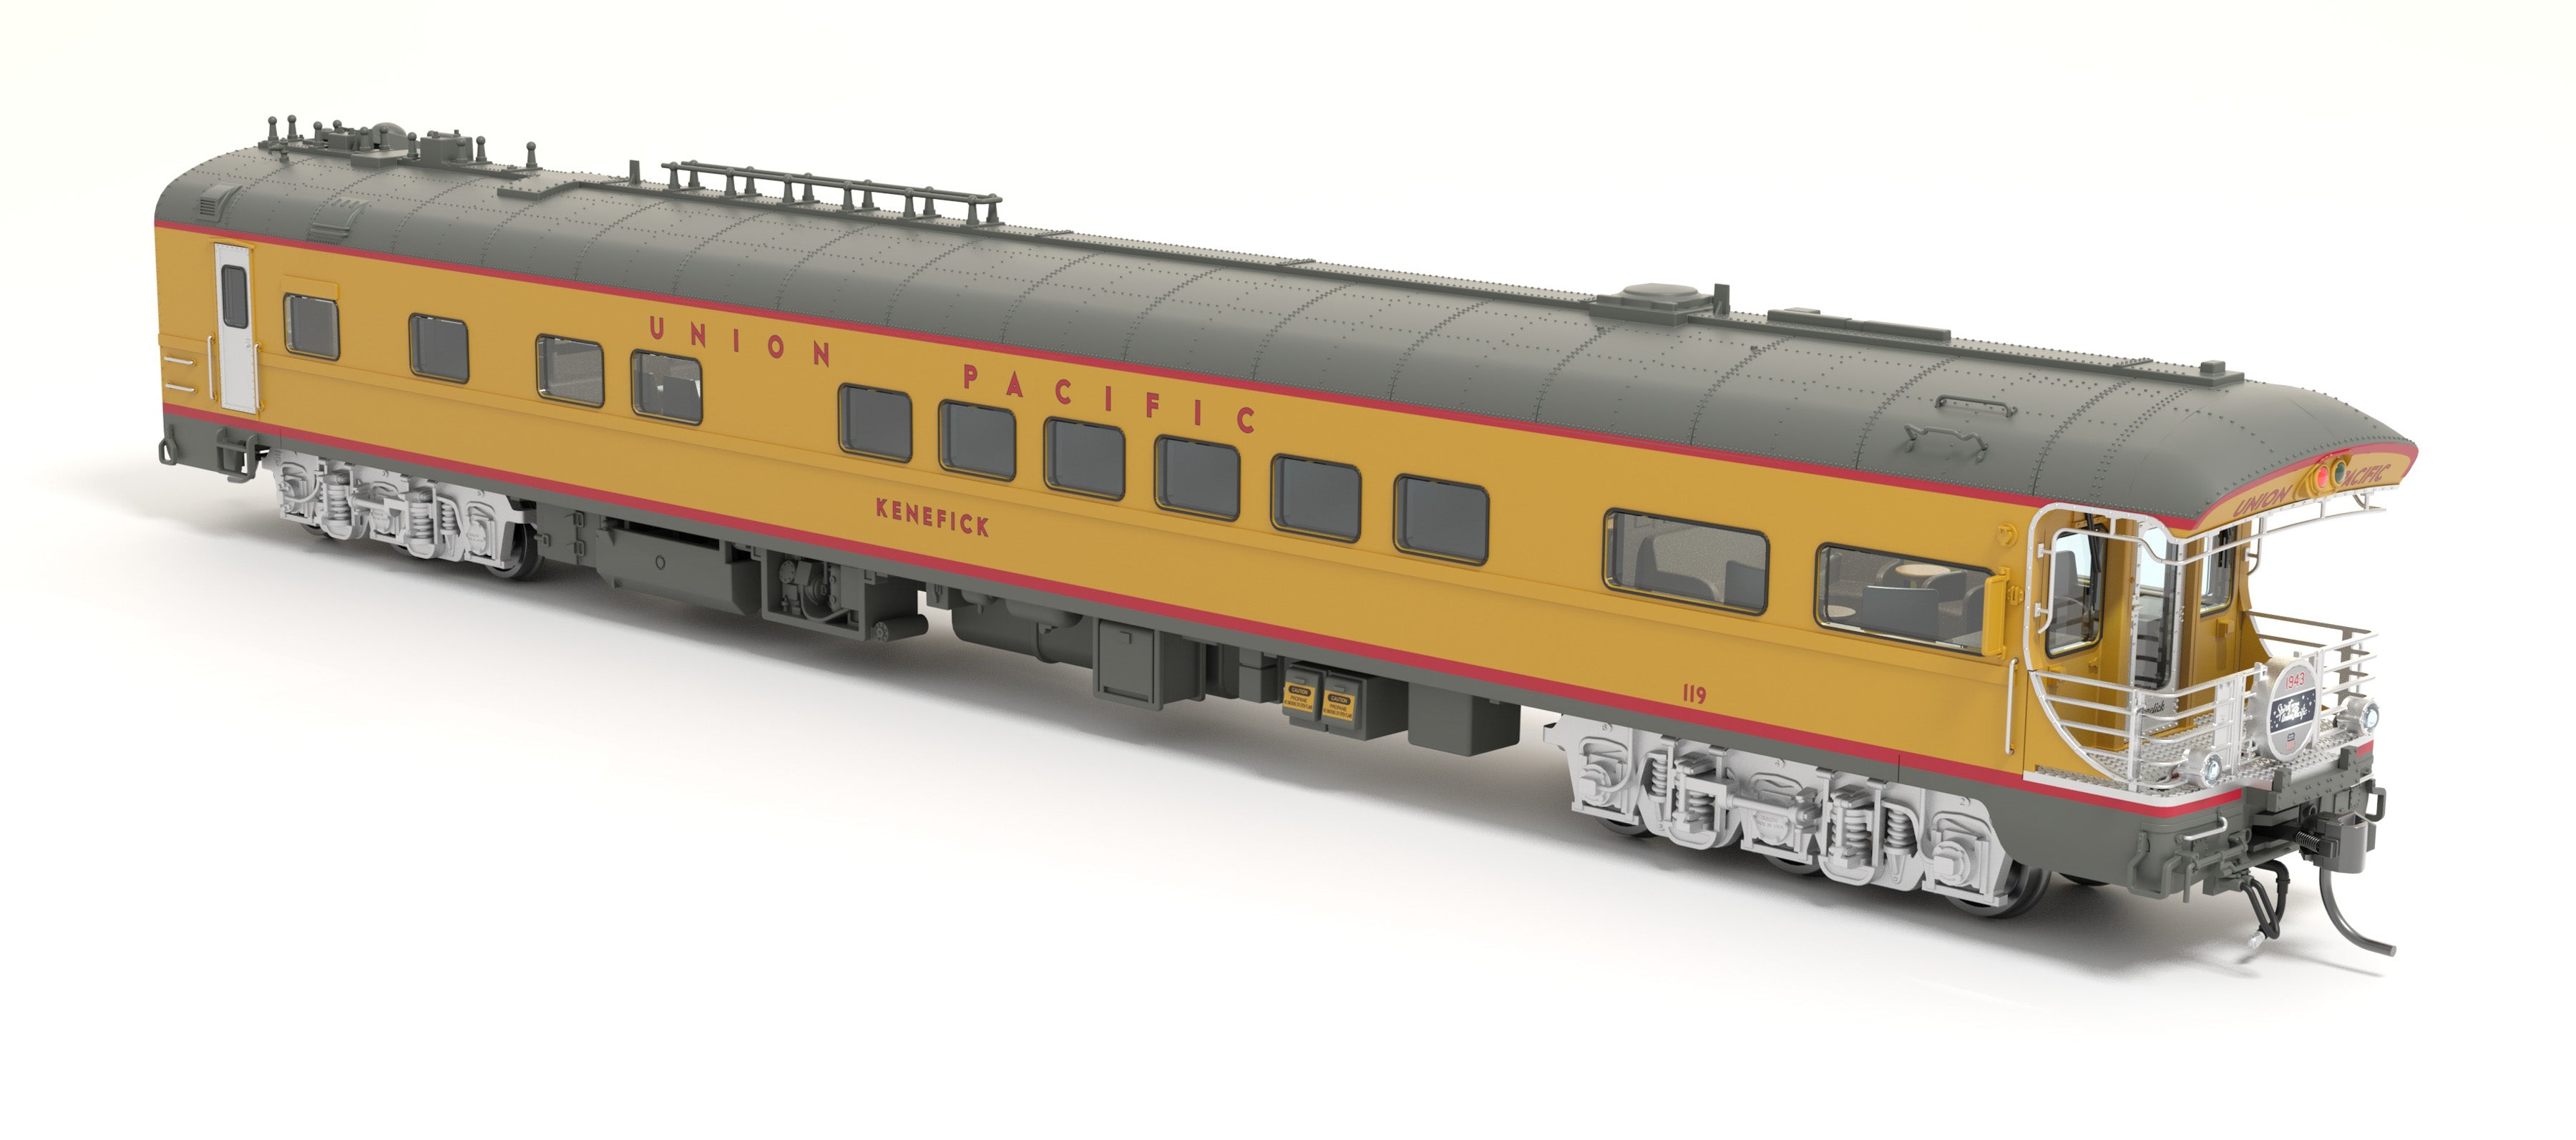 9015 Union Pacific Business Car, UP #119 "Kenefick", "Spirit of the Union Pacific" Drumhead, HO Scale